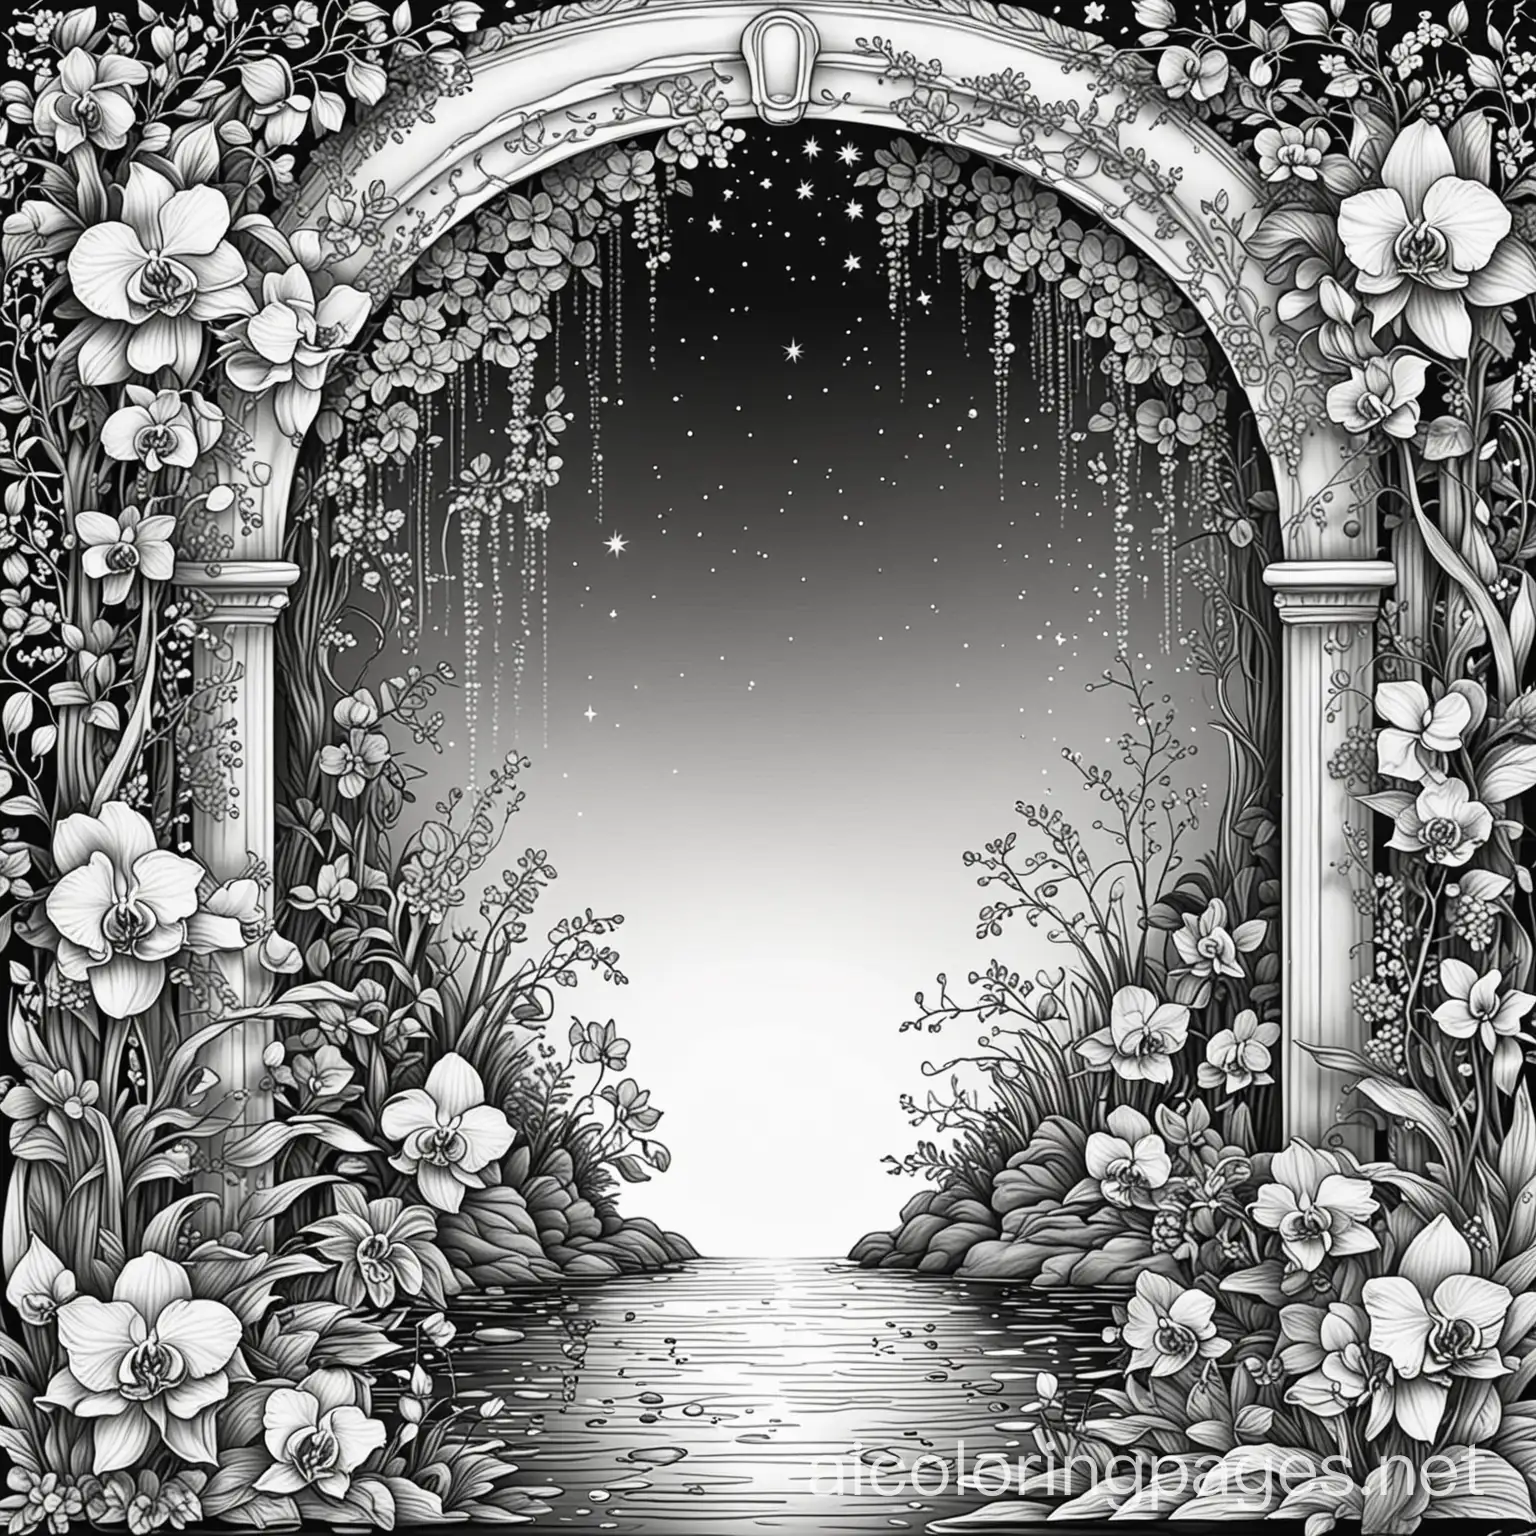 Inverted-Mirror-Image-Reverse-Waterfall-Under-Dark-Night-Sky-with-Stars-and-Hanging-Vines-Coloring-Page